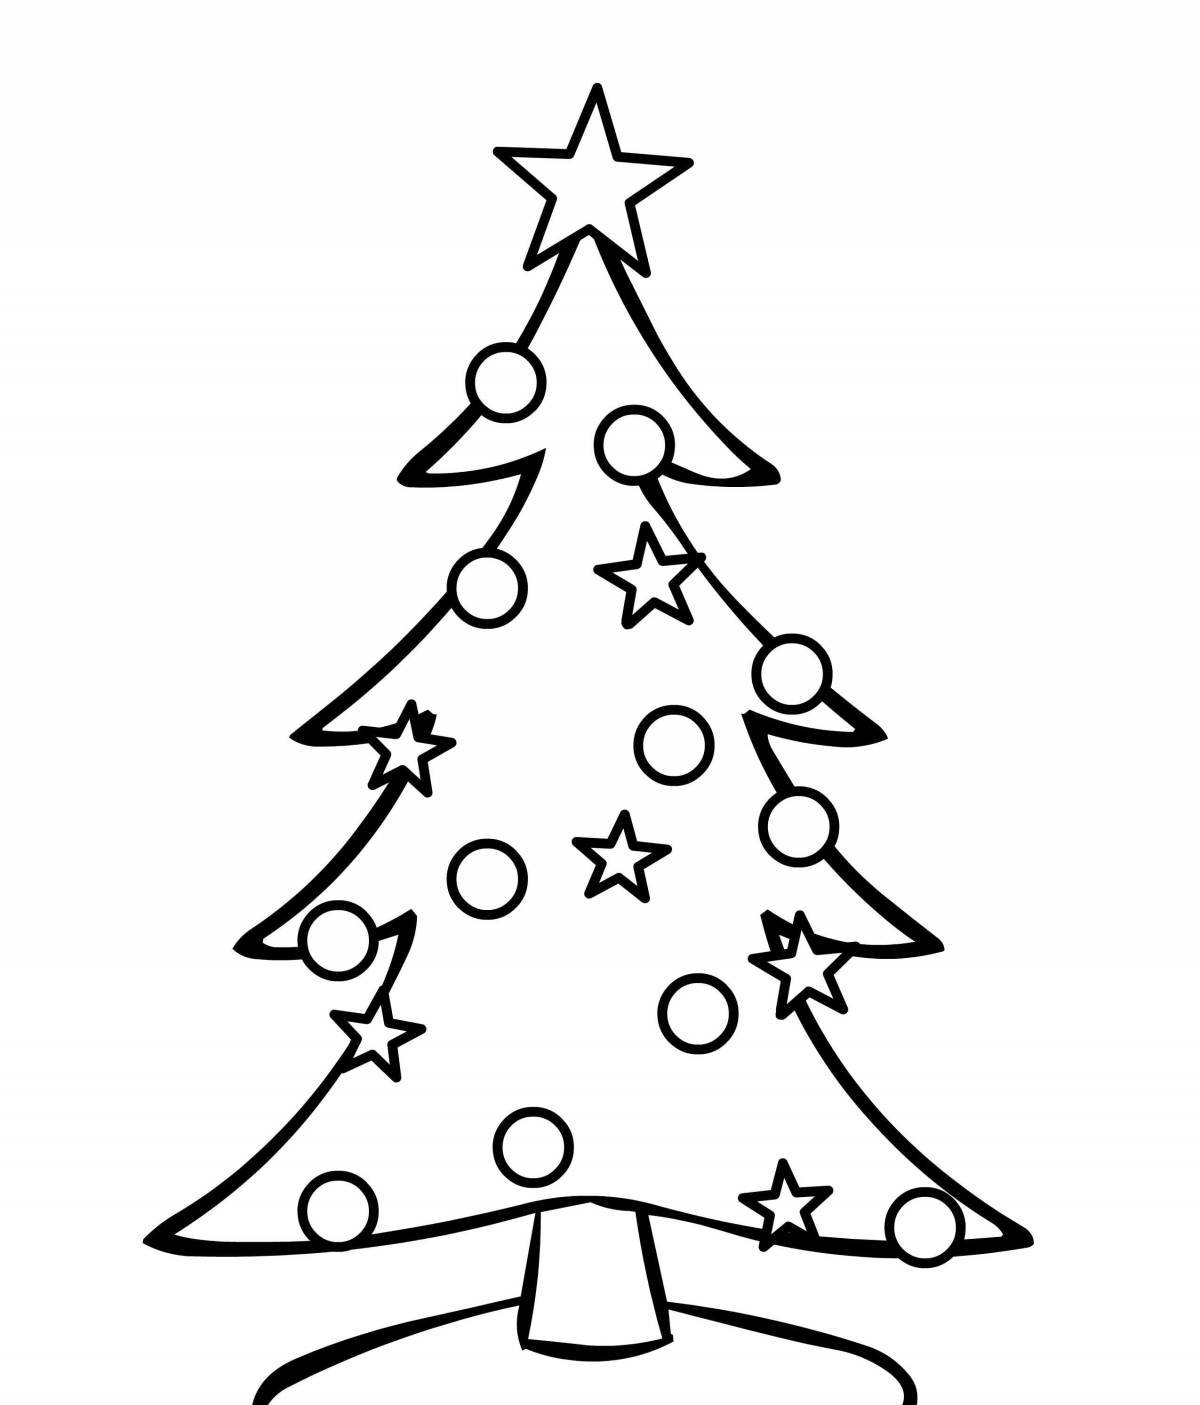 Fabulous Christmas tree coloring book for 2-3 year olds